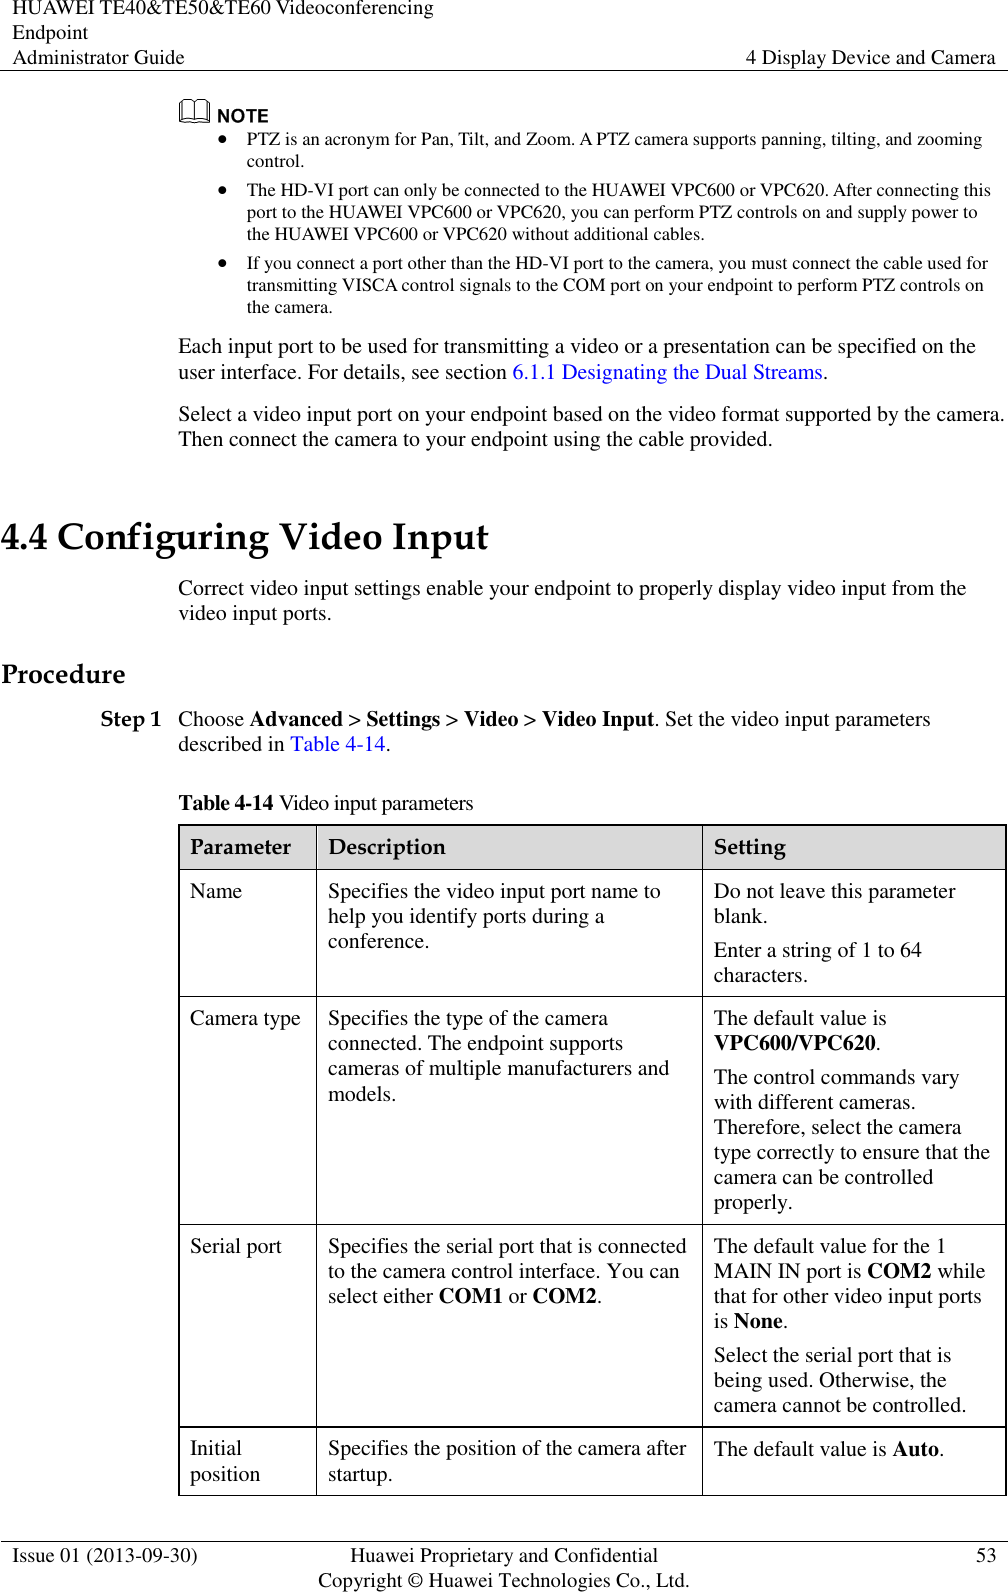 HUAWEI TE40&amp;TE50&amp;TE60 Videoconferencing Endpoint Administrator Guide 4 Display Device and Camera  Issue 01 (2013-09-30) Huawei Proprietary and Confidential                                     Copyright © Huawei Technologies Co., Ltd. 53    PTZ is an acronym for Pan, Tilt, and Zoom. A PTZ camera supports panning, tilting, and zooming control.  The HD-VI port can only be connected to the HUAWEI VPC600 or VPC620. After connecting this port to the HUAWEI VPC600 or VPC620, you can perform PTZ controls on and supply power to the HUAWEI VPC600 or VPC620 without additional cables.  If you connect a port other than the HD-VI port to the camera, you must connect the cable used for transmitting VISCA control signals to the COM port on your endpoint to perform PTZ controls on the camera. Each input port to be used for transmitting a video or a presentation can be specified on the user interface. For details, see section 6.1.1 Designating the Dual Streams. Select a video input port on your endpoint based on the video format supported by the camera. Then connect the camera to your endpoint using the cable provided.   4.4 Configuring Video Input Correct video input settings enable your endpoint to properly display video input from the video input ports. Procedure Step 1 Choose Advanced &gt; Settings &gt; Video &gt; Video Input. Set the video input parameters described in Table 4-14. Table 4-14 Video input parameters Parameter Description Setting Name Specifies the video input port name to help you identify ports during a conference. Do not leave this parameter blank. Enter a string of 1 to 64 characters. Camera type Specifies the type of the camera connected. The endpoint supports cameras of multiple manufacturers and models. The default value is VPC600/VPC620. The control commands vary with different cameras. Therefore, select the camera type correctly to ensure that the camera can be controlled properly. Serial port Specifies the serial port that is connected to the camera control interface. You can select either COM1 or COM2. The default value for the 1 MAIN IN port is COM2 while that for other video input ports is None. Select the serial port that is being used. Otherwise, the camera cannot be controlled. Initial position Specifies the position of the camera after startup. The default value is Auto. 